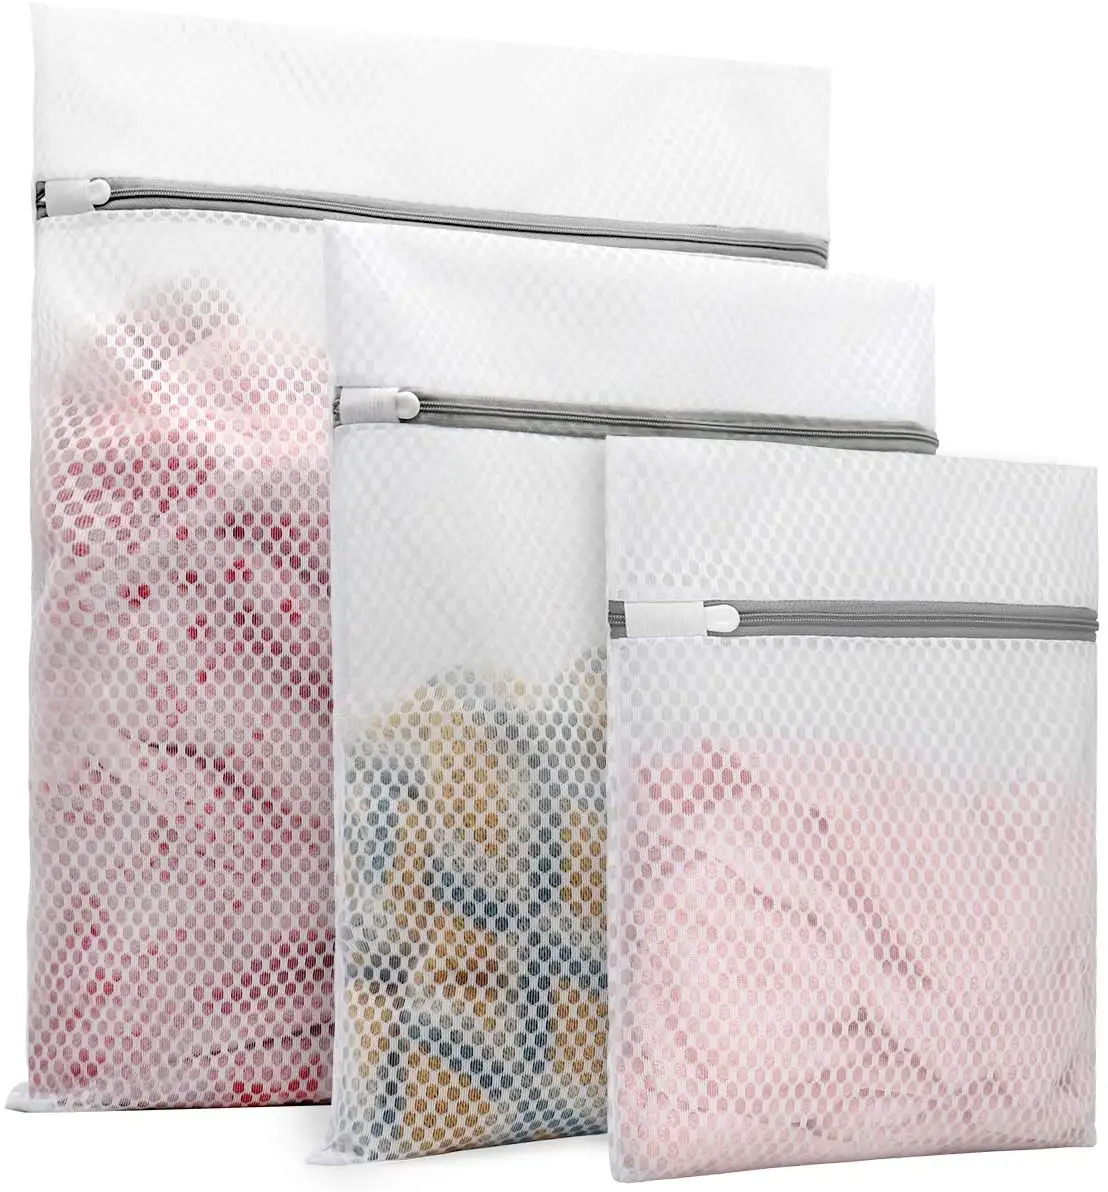 Laundry Bags Suitable For Washing All Kinds Of Clothes And Pants